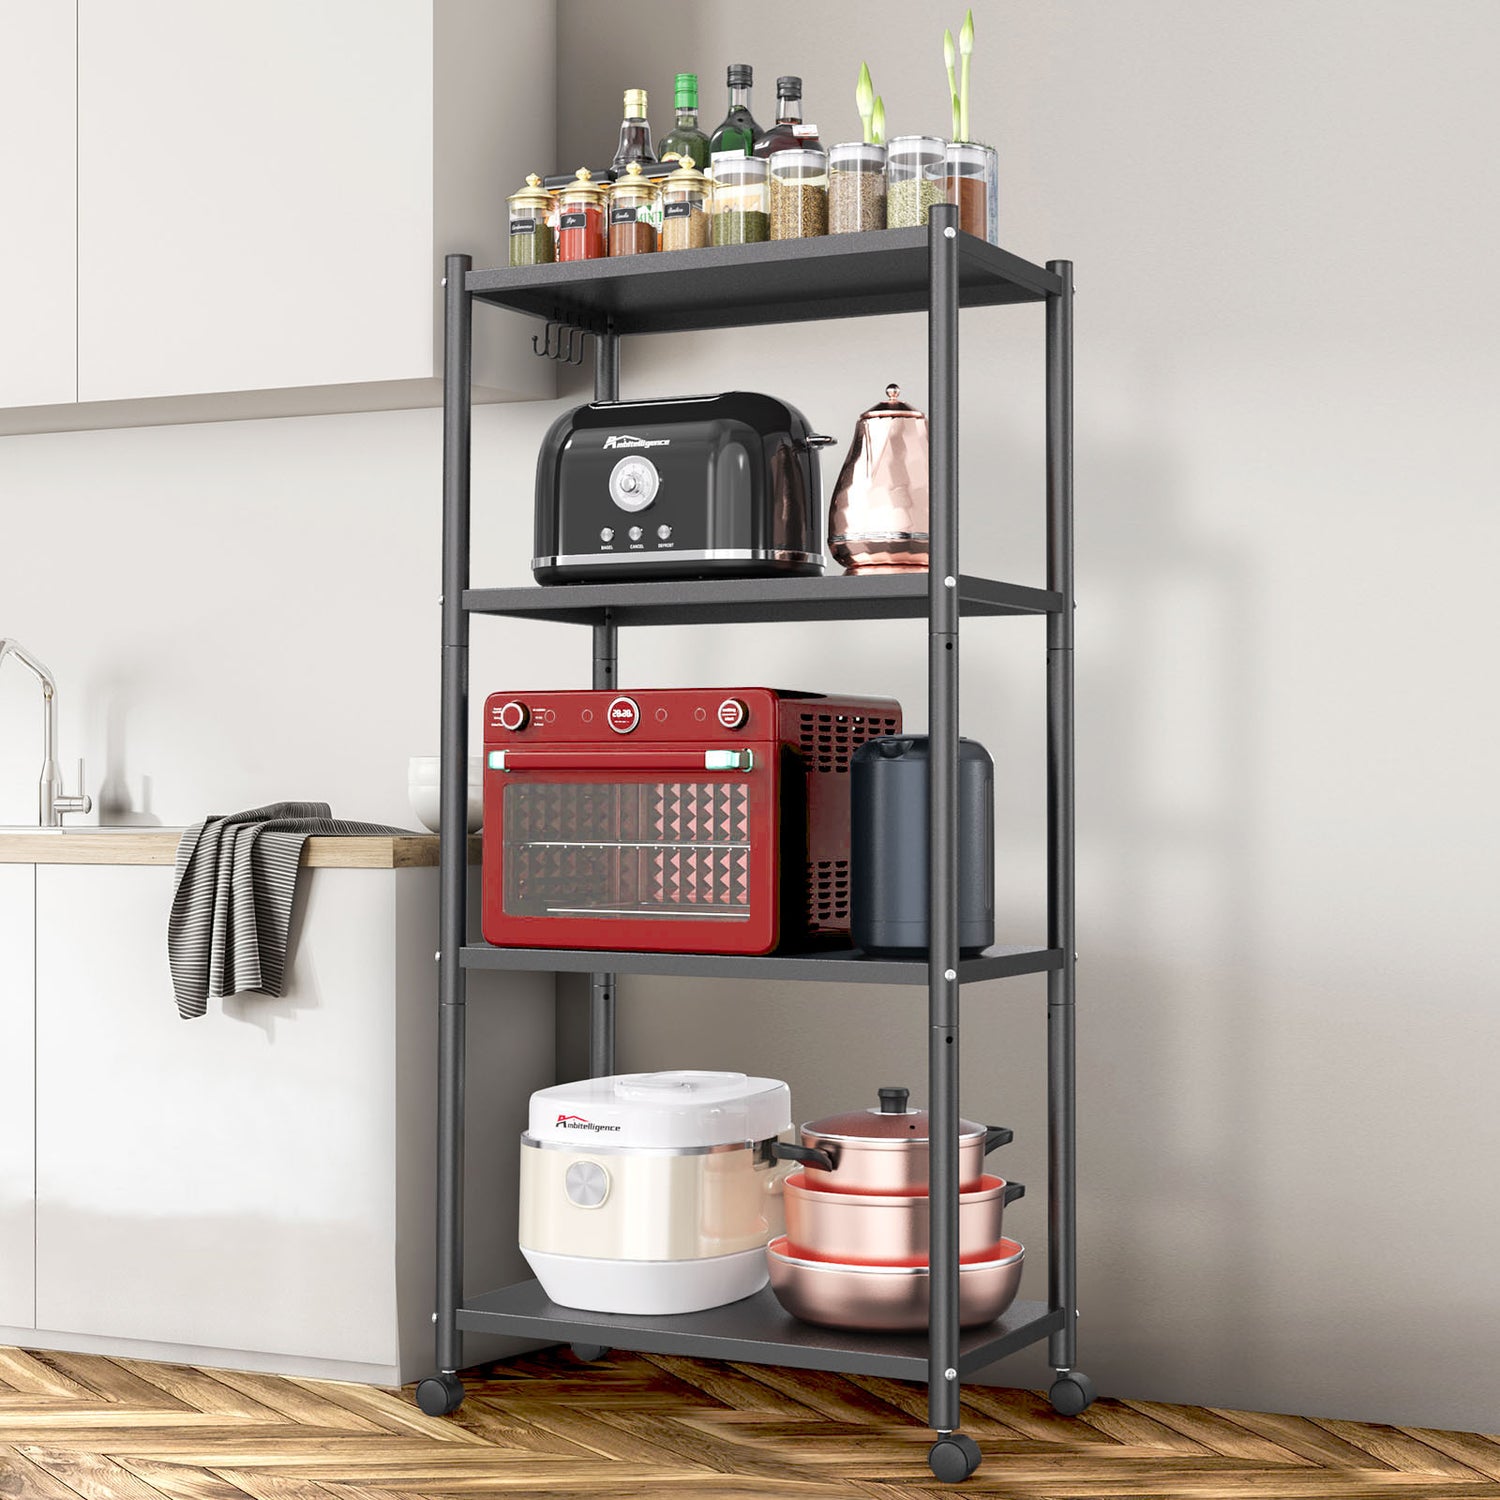 AmbiCraft Adjustable Kitchen Rack with Mobile Flexibility